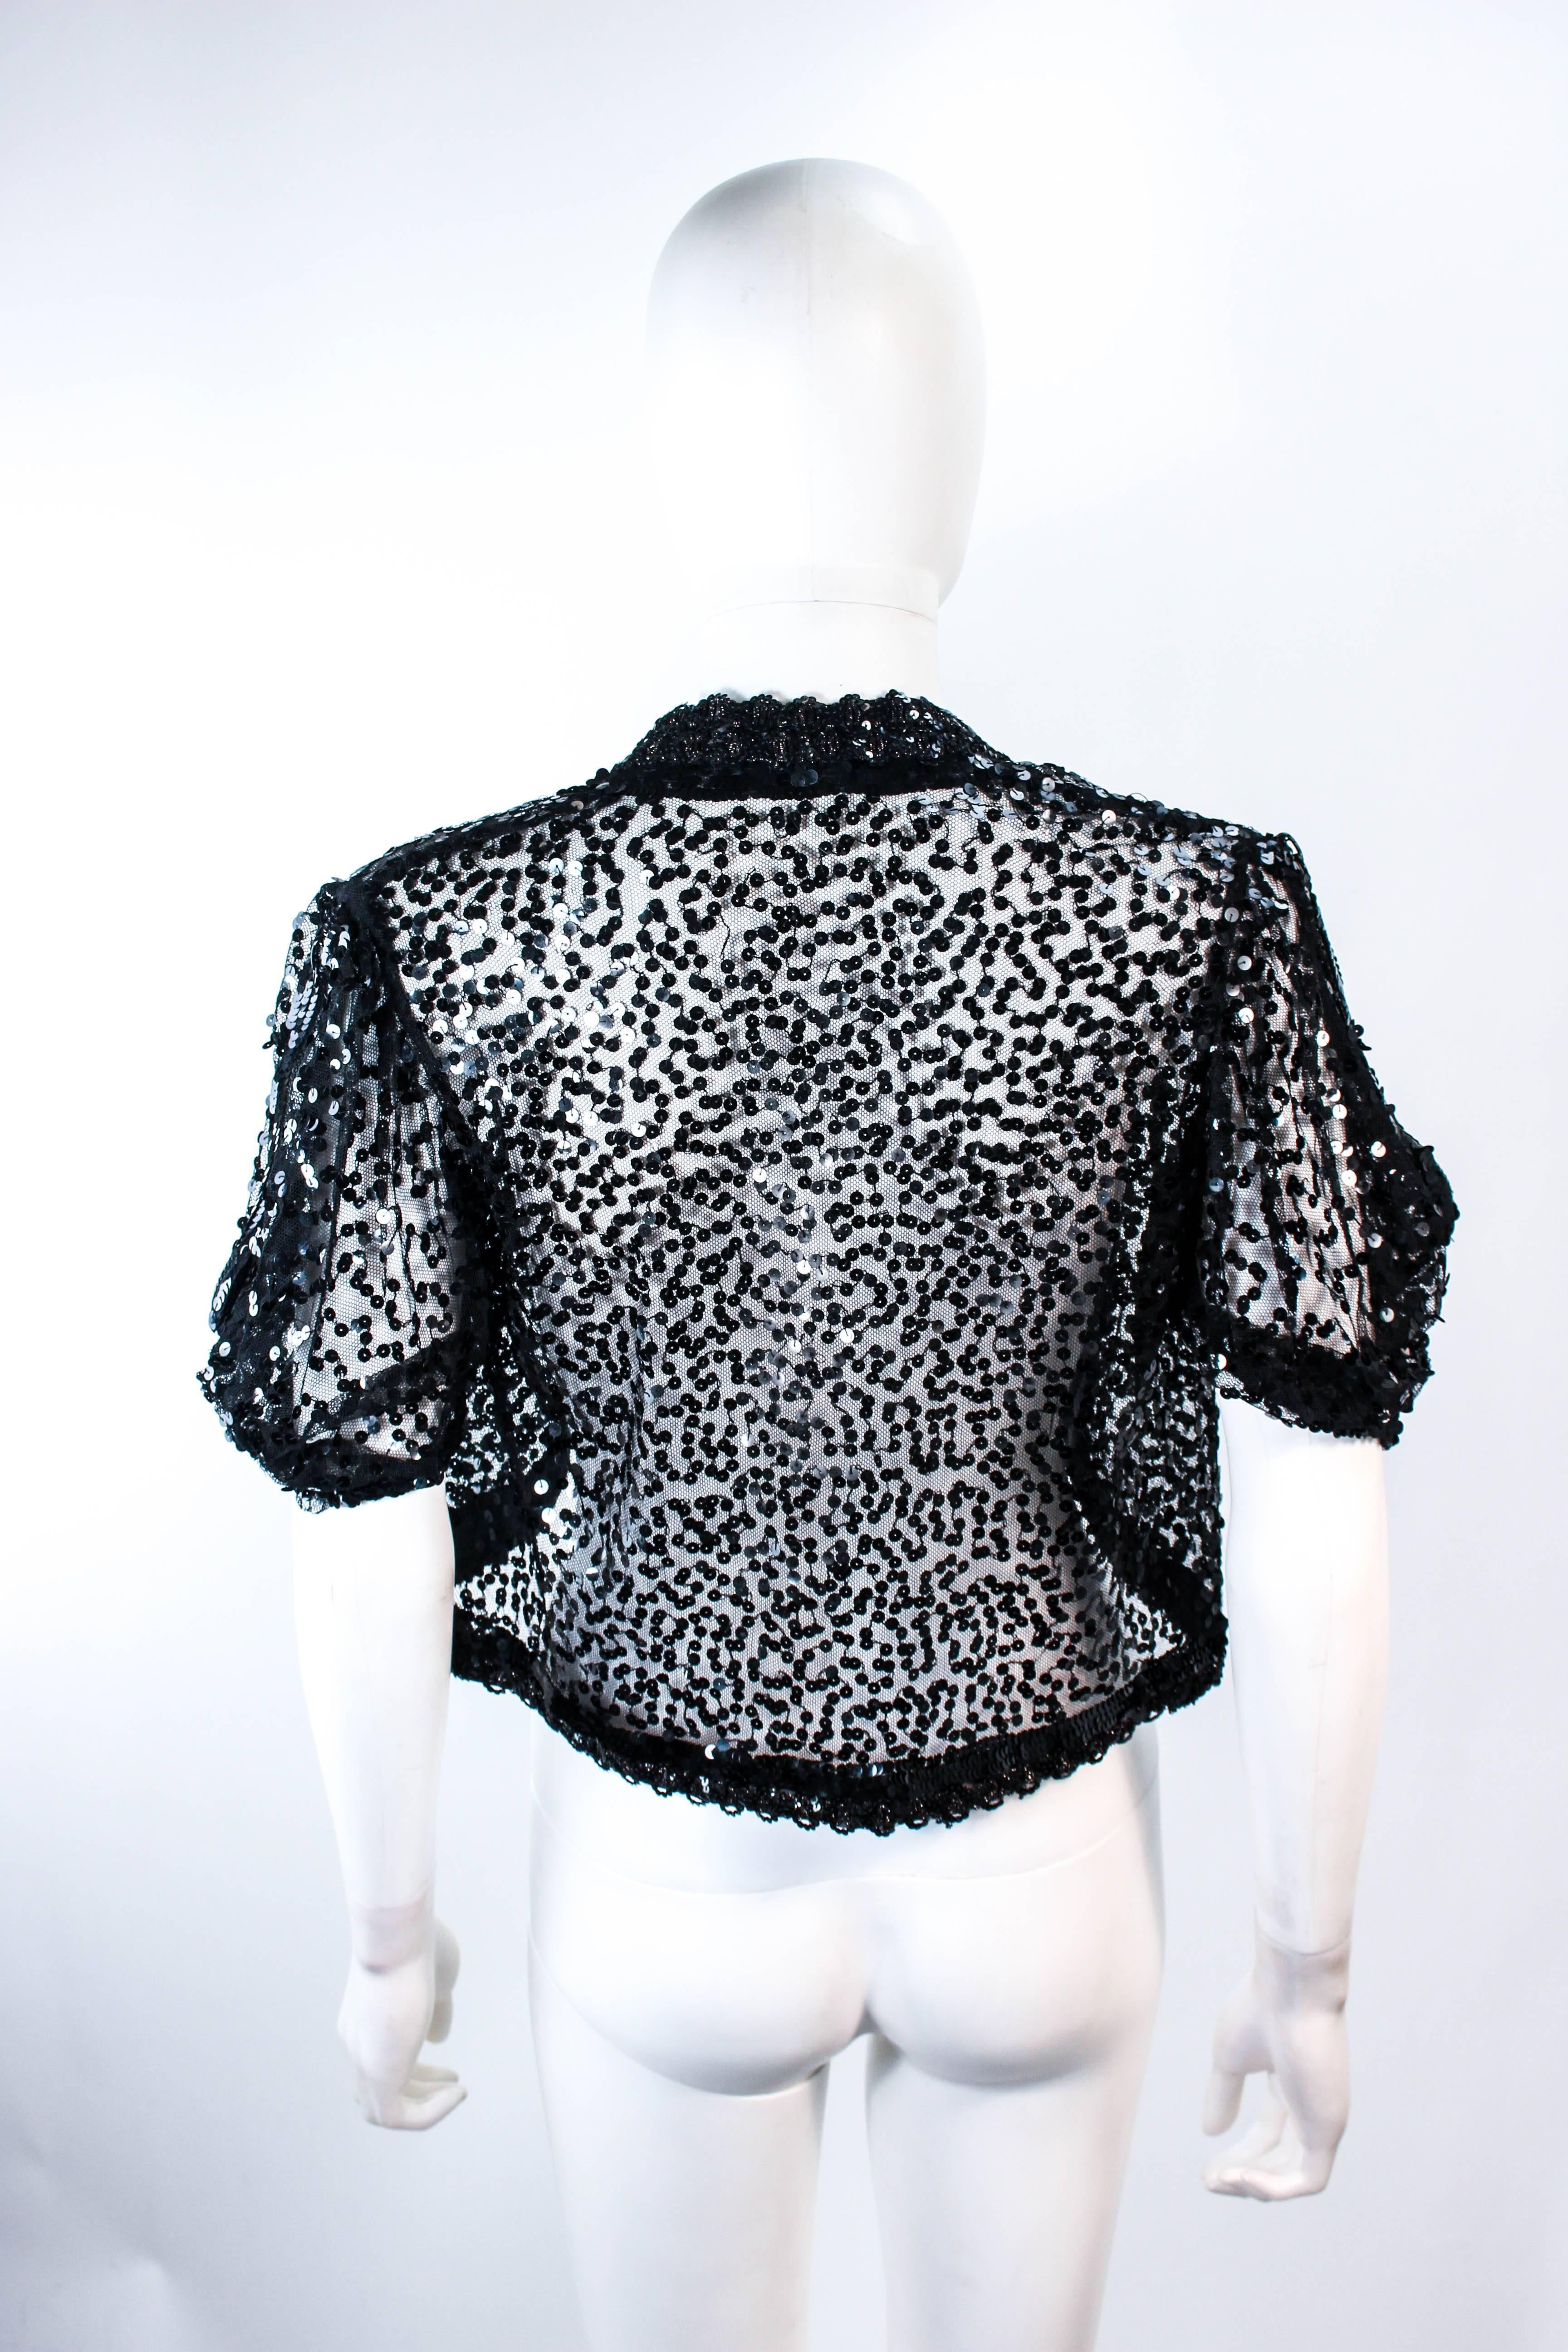 ANTIQUE 1930'S Black Sequin Mesh Jacket with Zipper Sleeves Size 4 For Sale 2